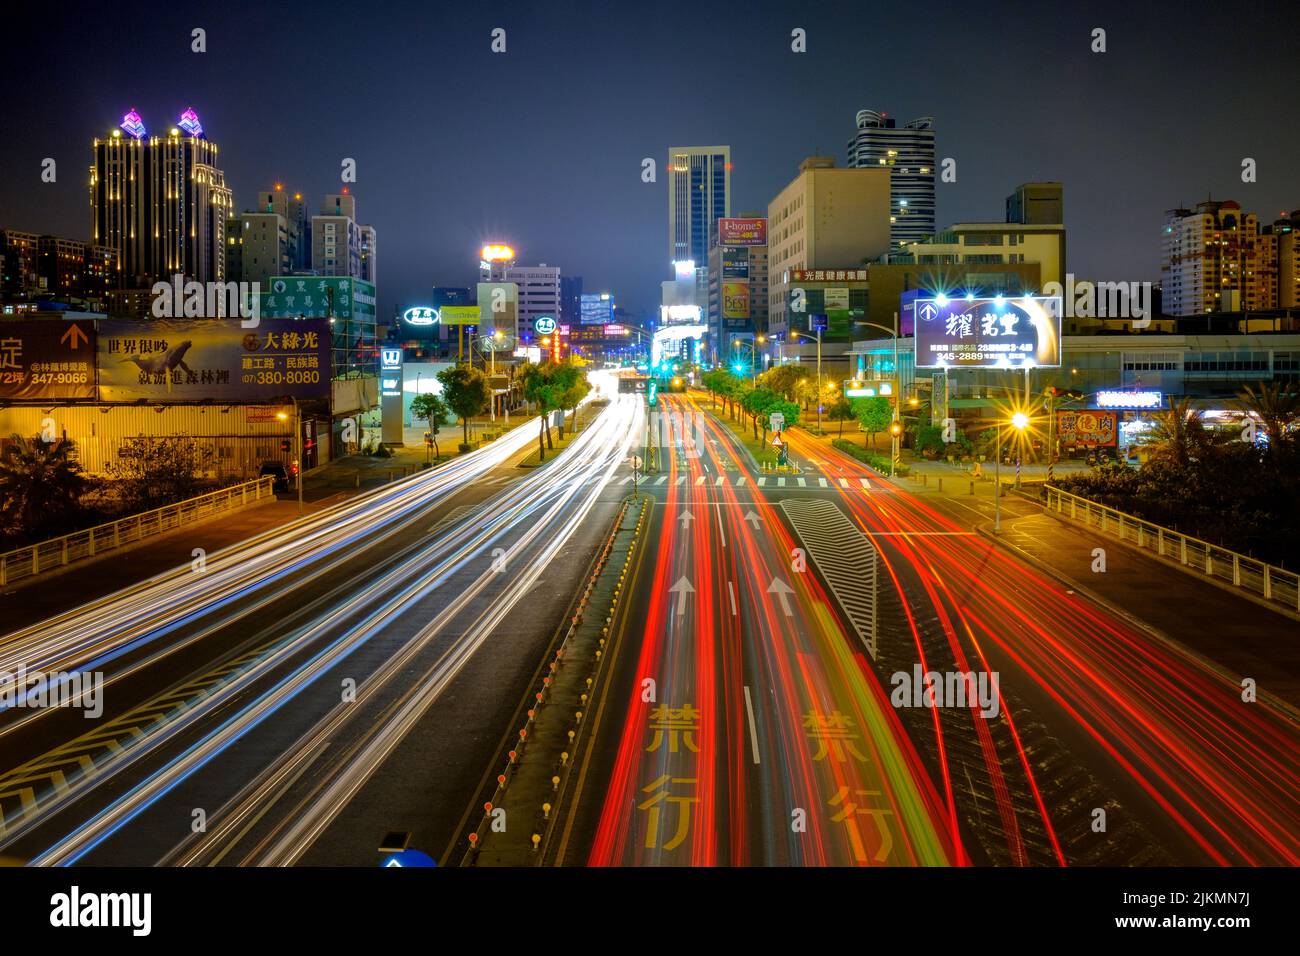 A view of an empty street of an Asian city at night illuminated by neon lights Stock Photo